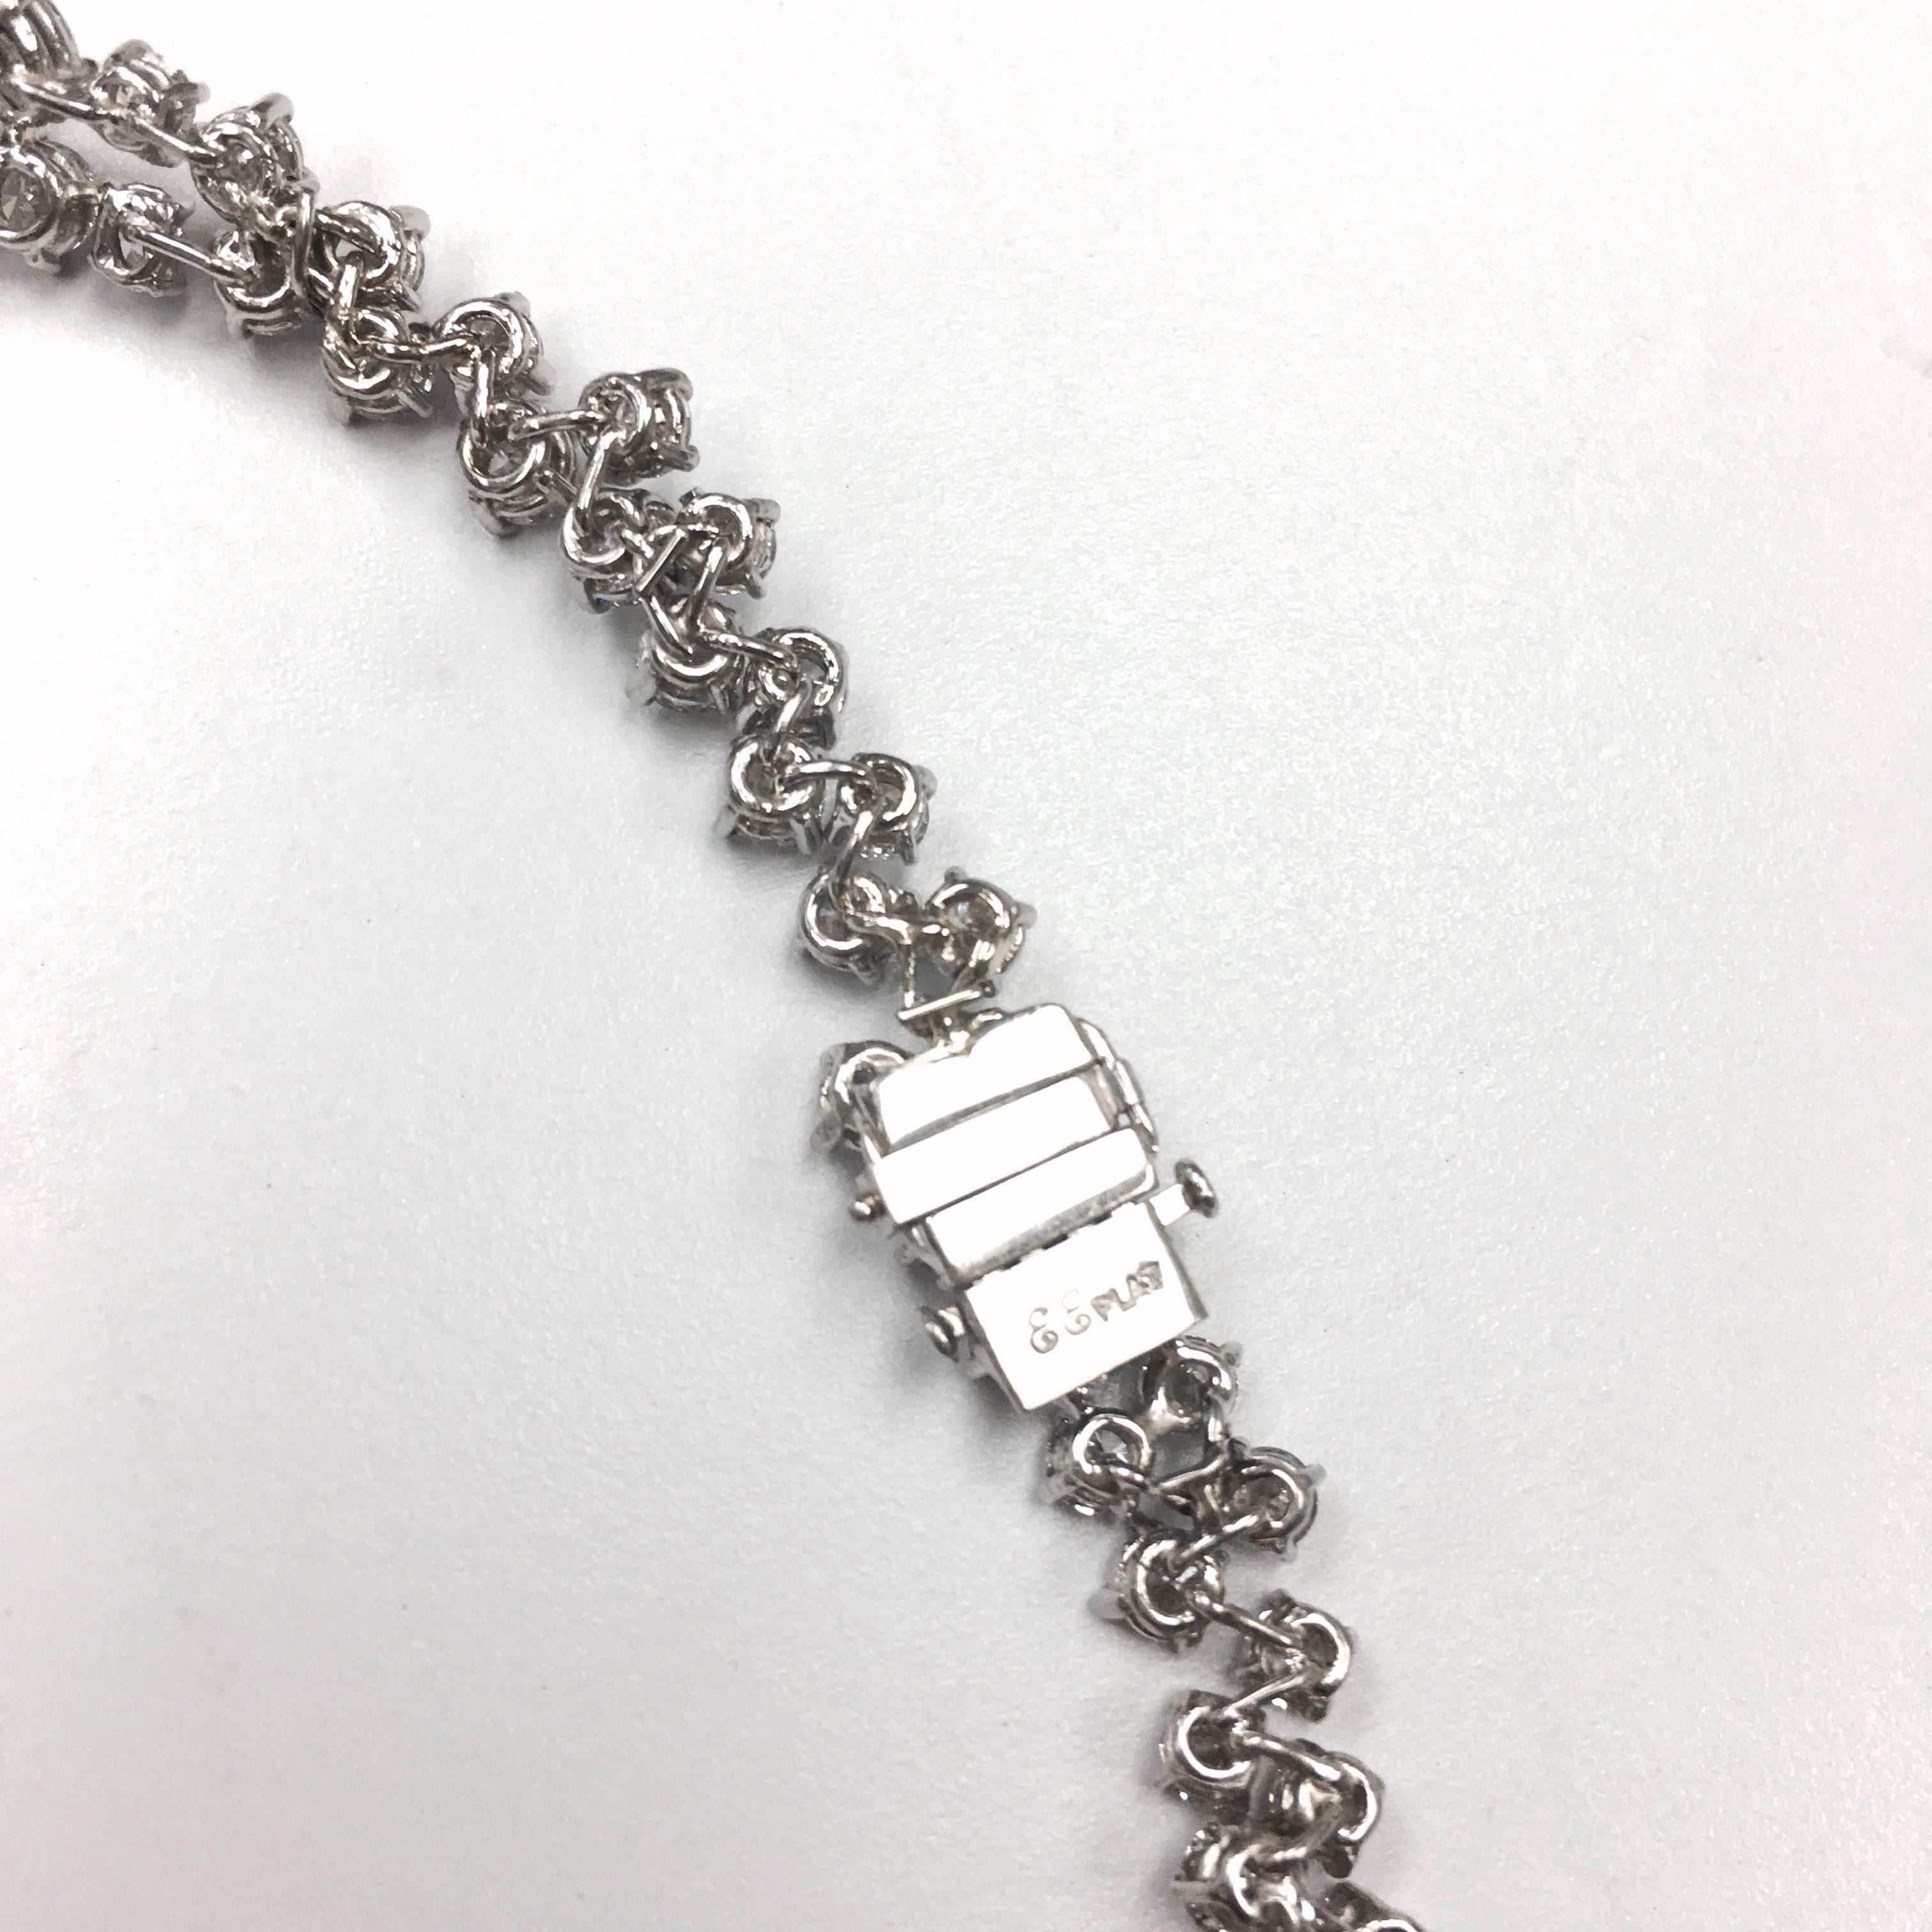 Magnificent Platinum Diamond Necklace In Excellent Condition For Sale In Agoura Hills, CA